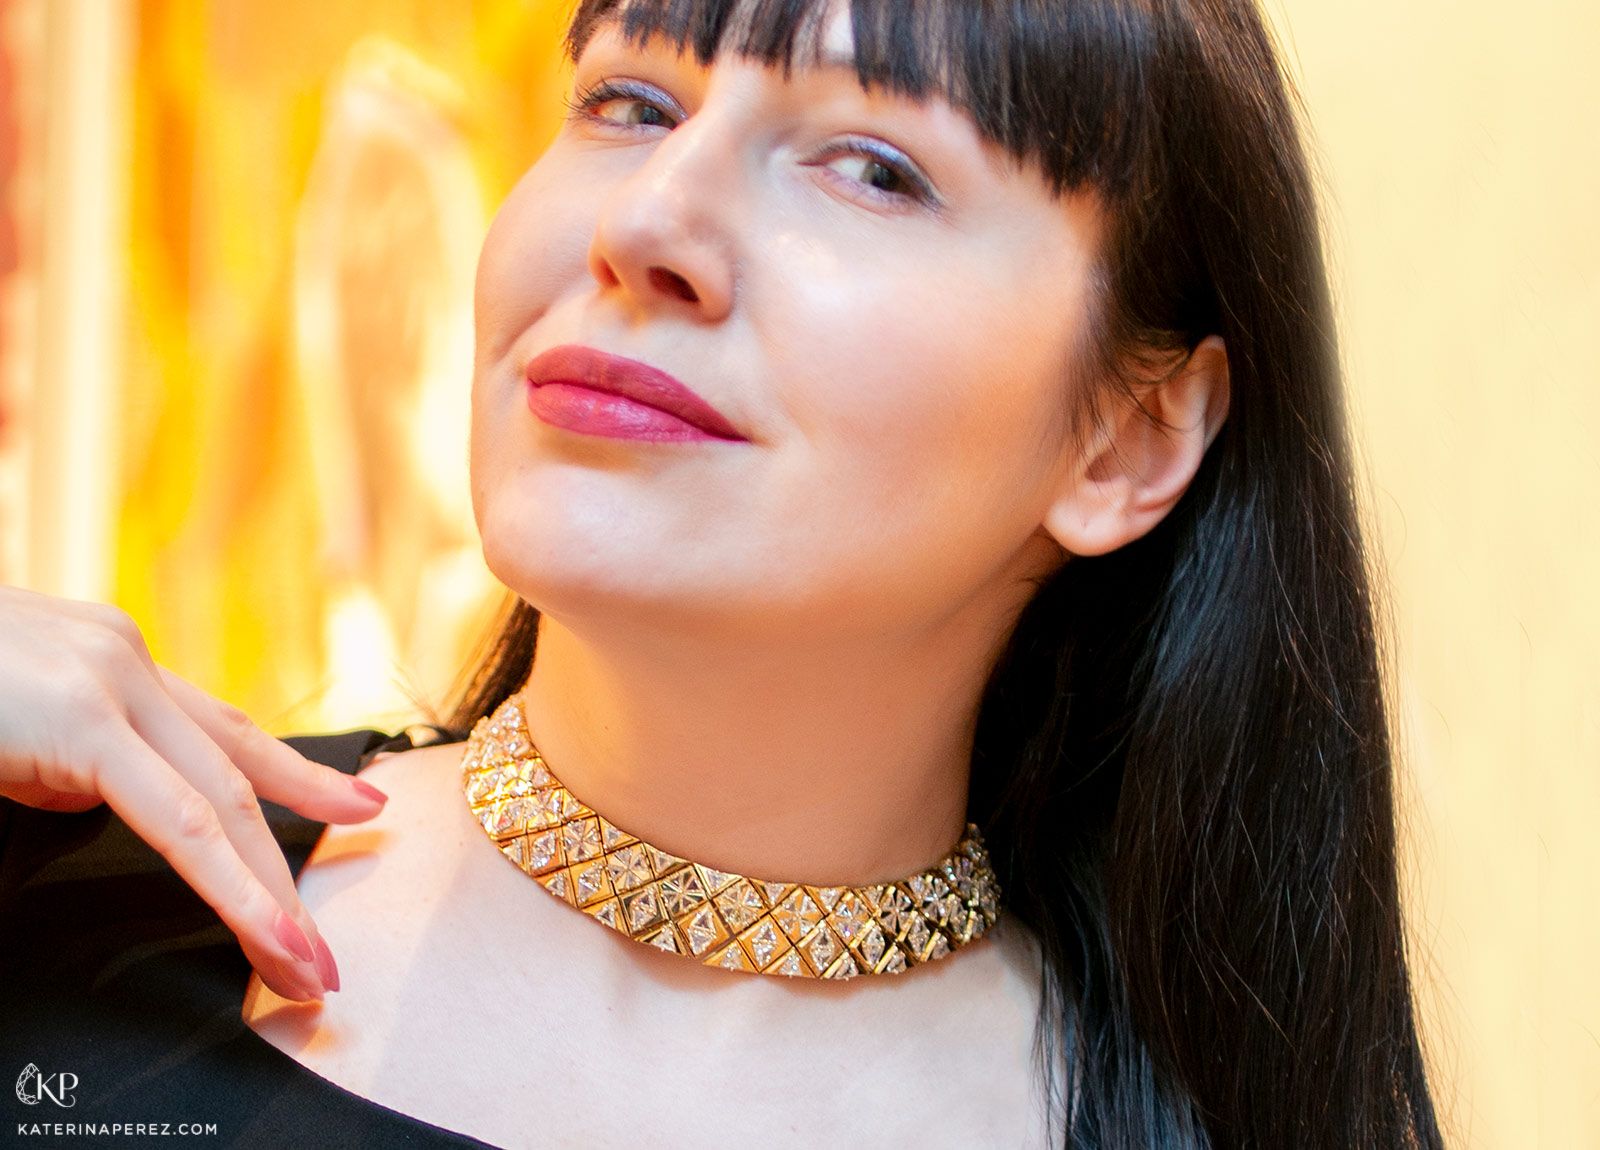 Katerina Perez wears an 18k yellow gold necklace with triangular-shaped diamonds which is due to be auctioned by Bonhams Paris in November 2021